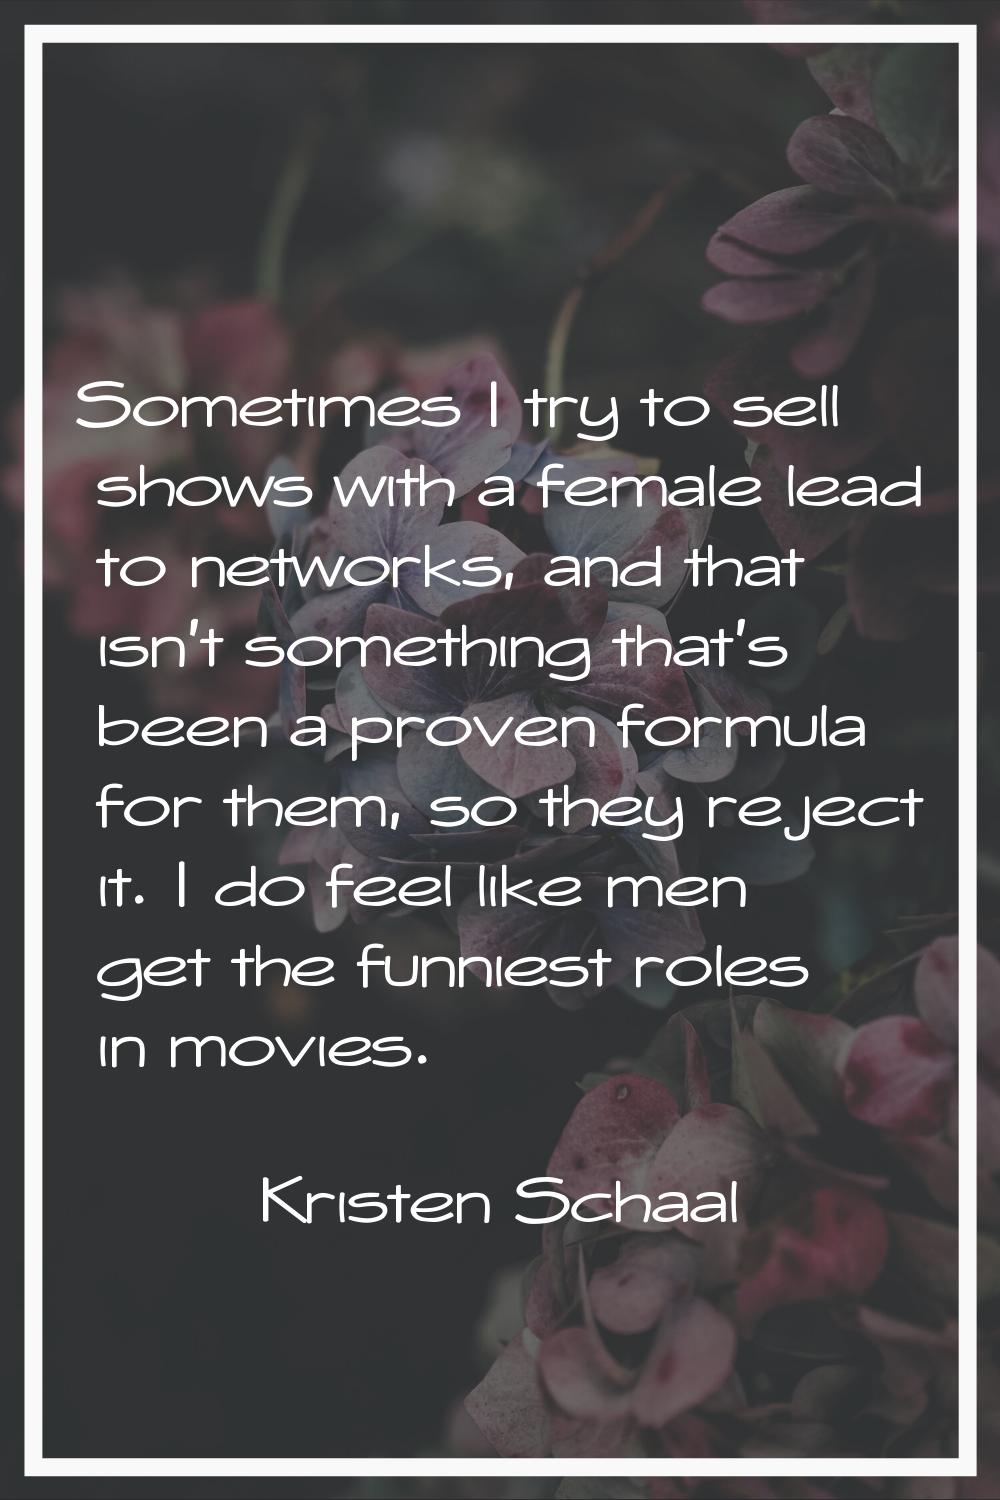 Sometimes I try to sell shows with a female lead to networks, and that isn't something that's been 